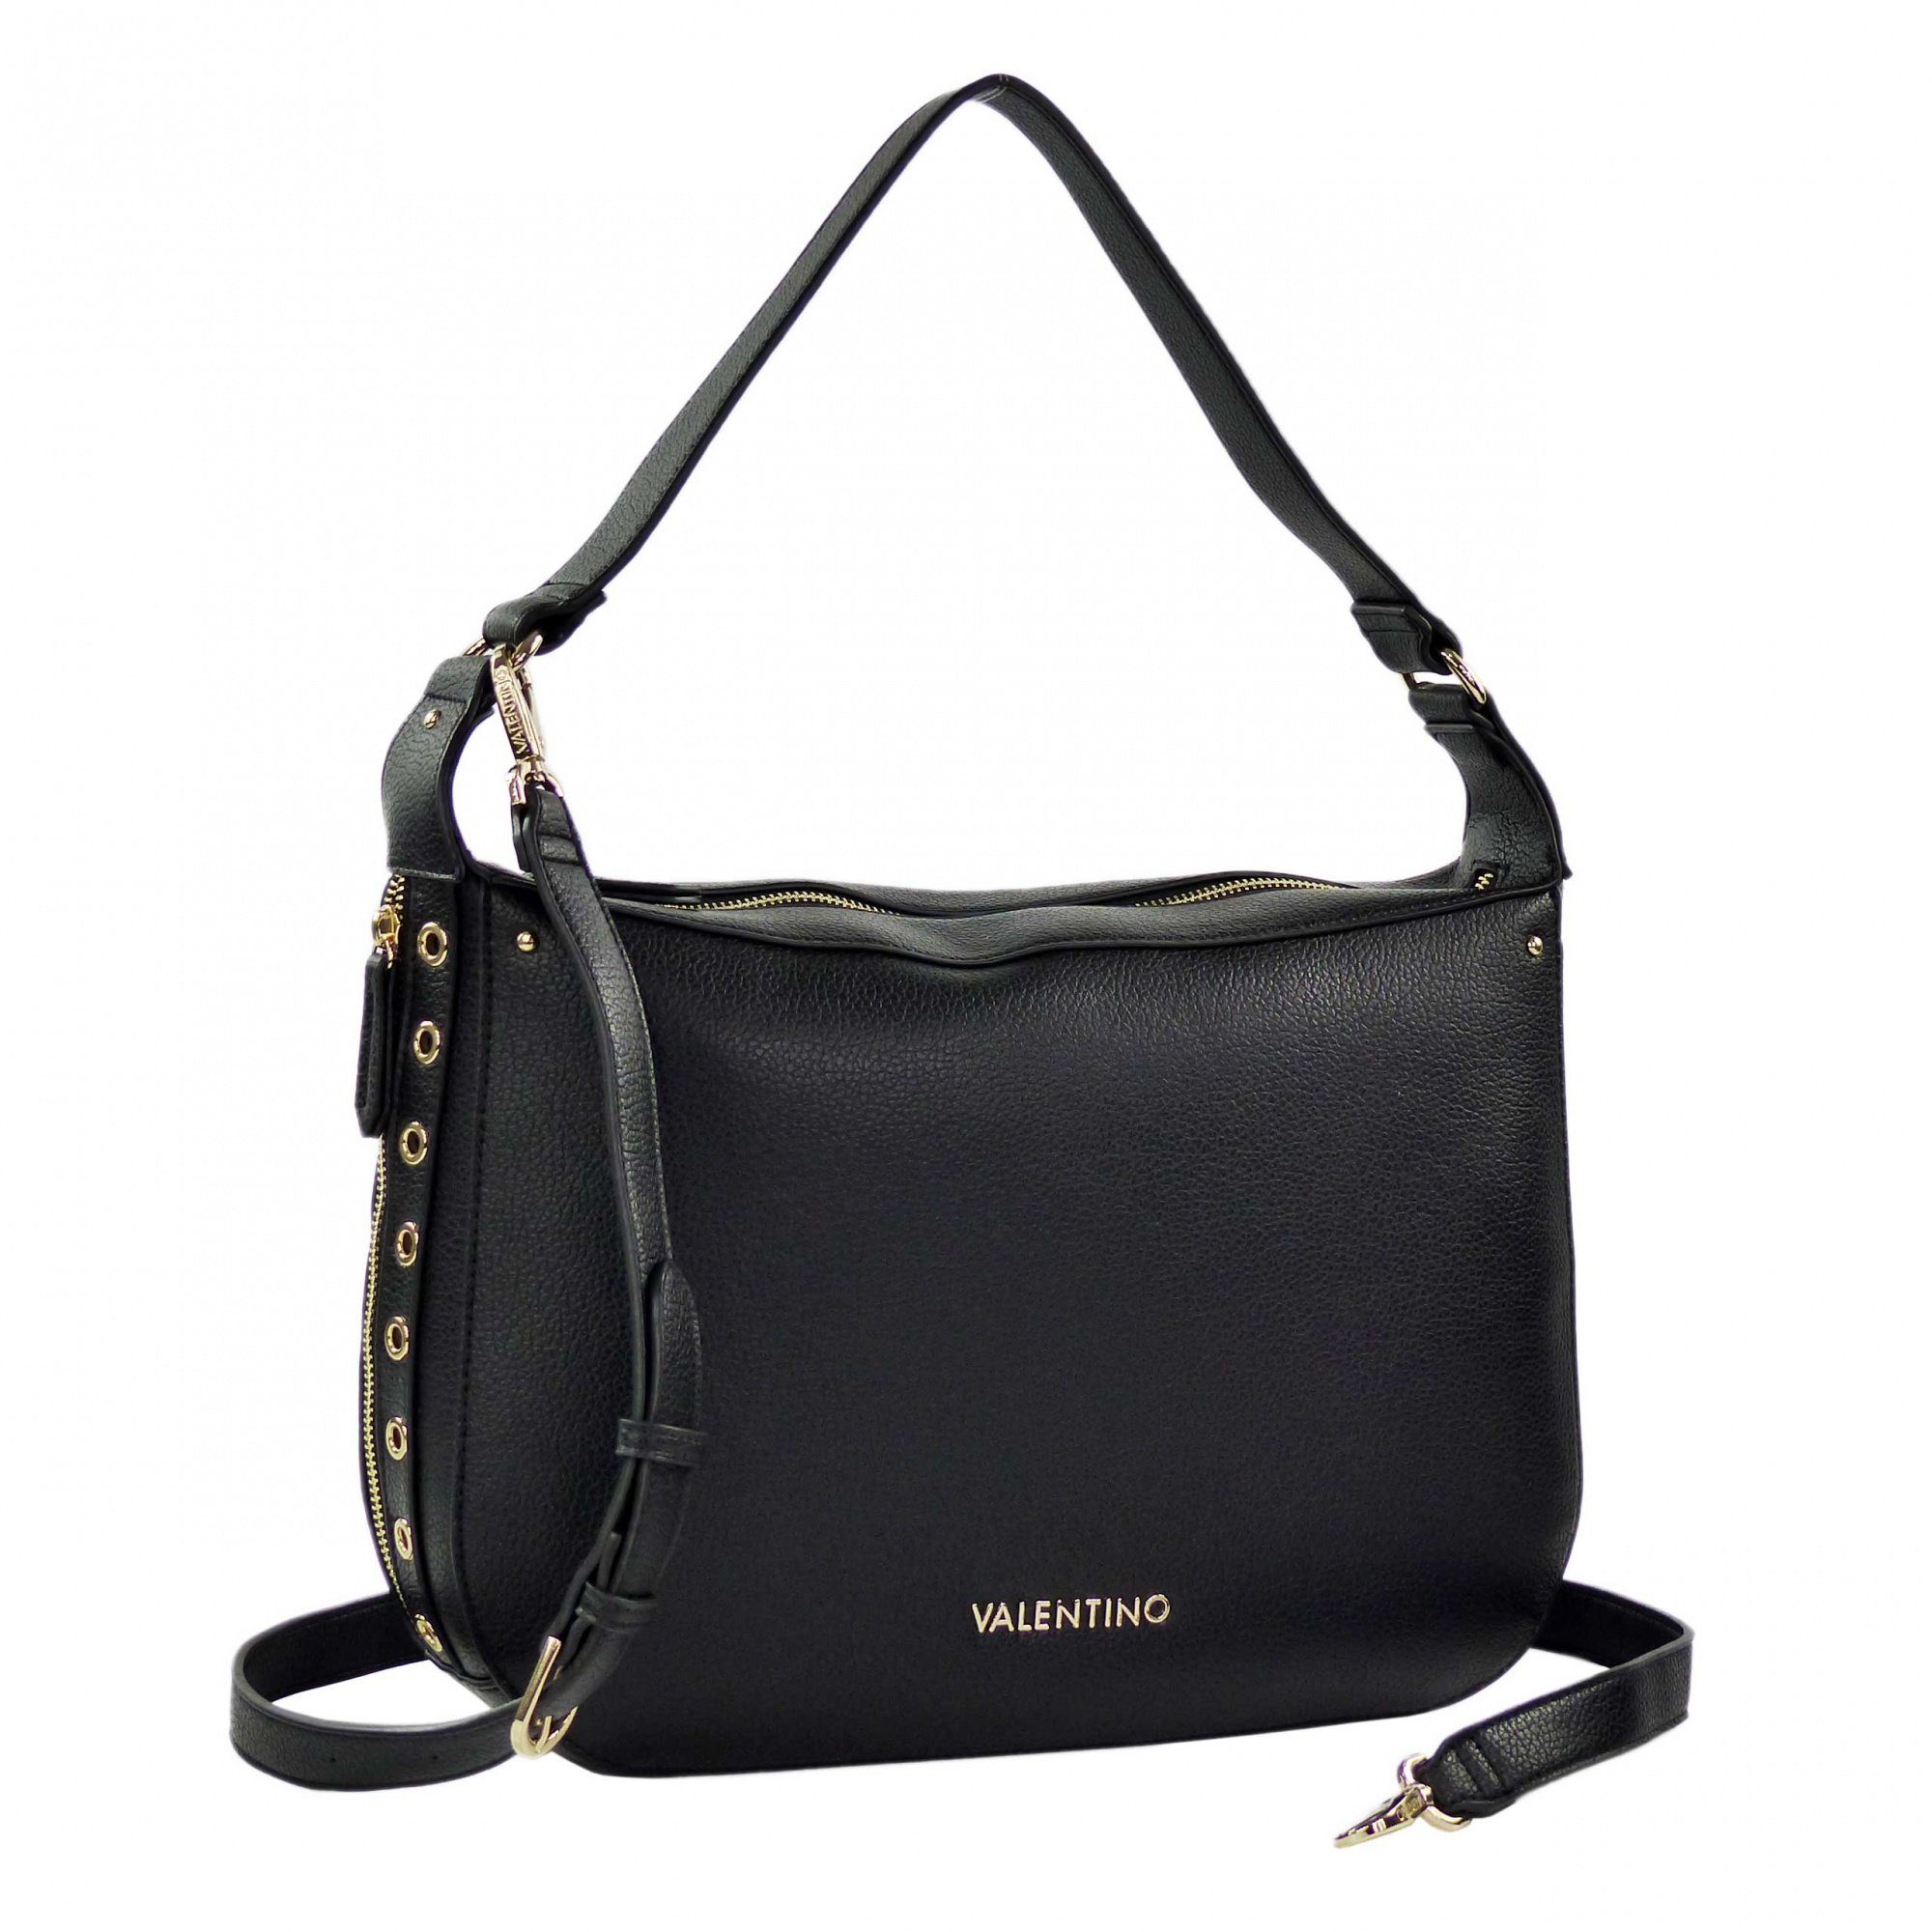 VALENTINO Nero Schultertasche VBS7GM02 BAGS Bag Hobo Megeve